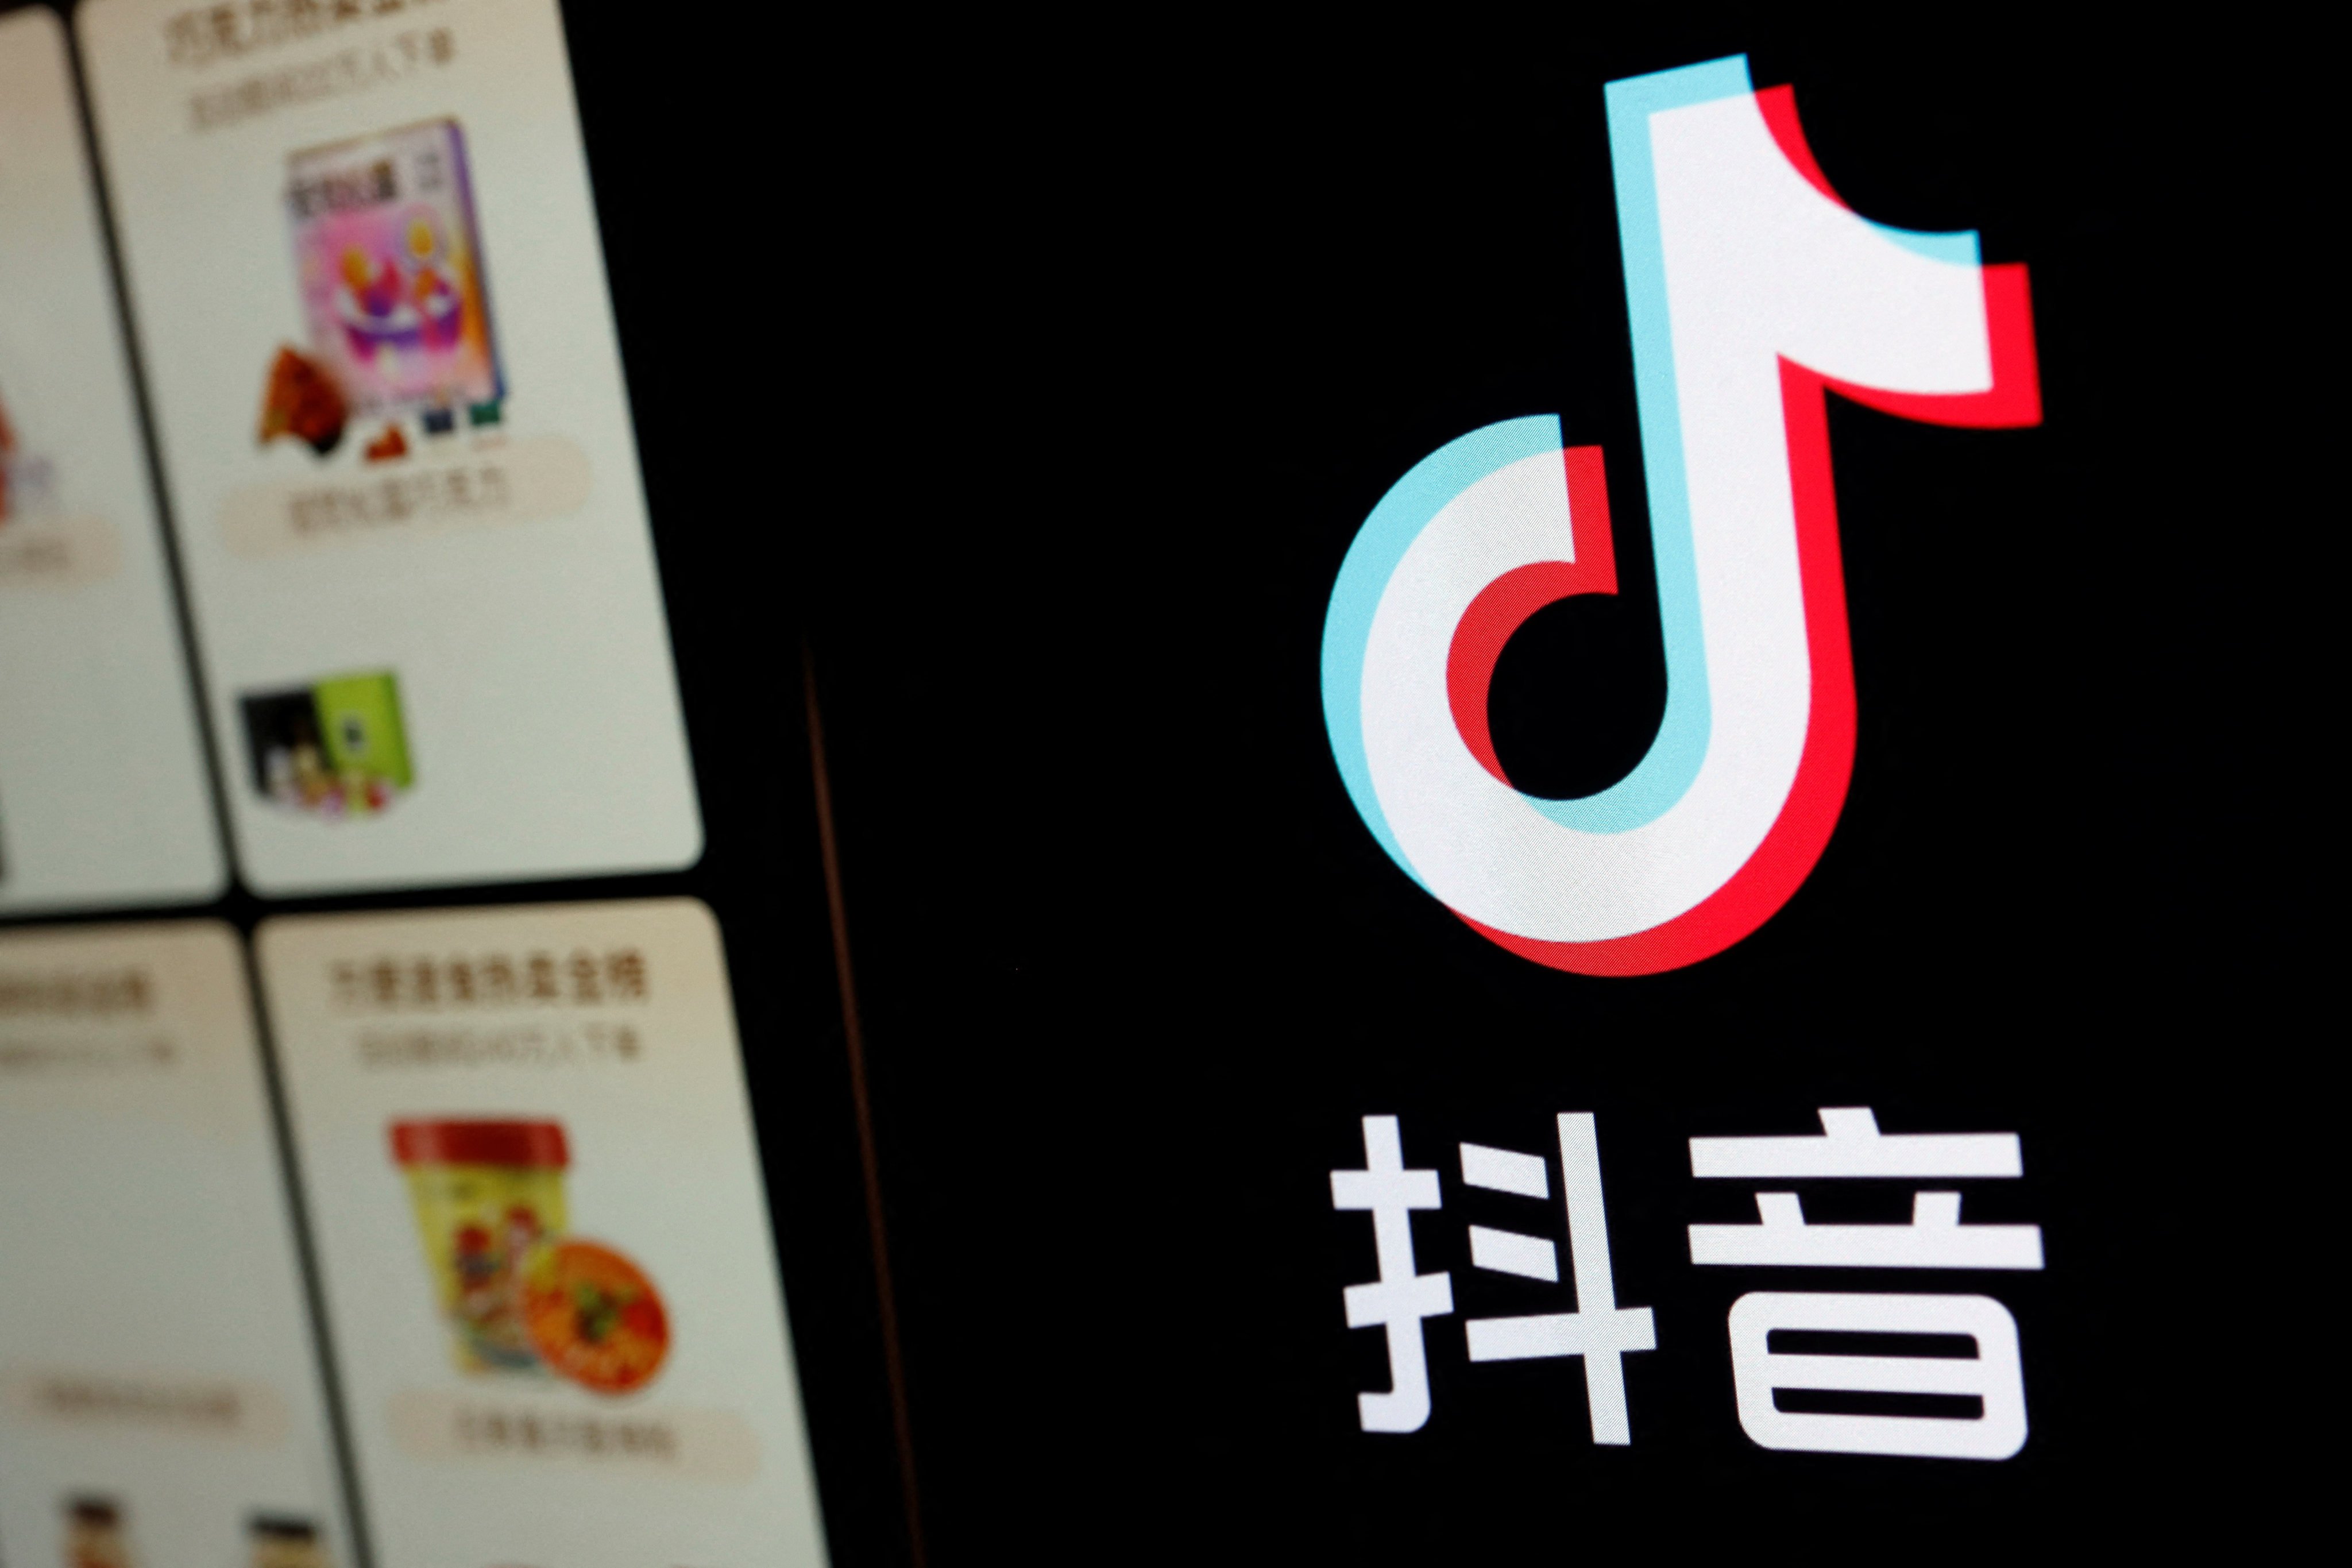 The logo of Douyin, the Chinese version of TikTok. Photo: Reuters